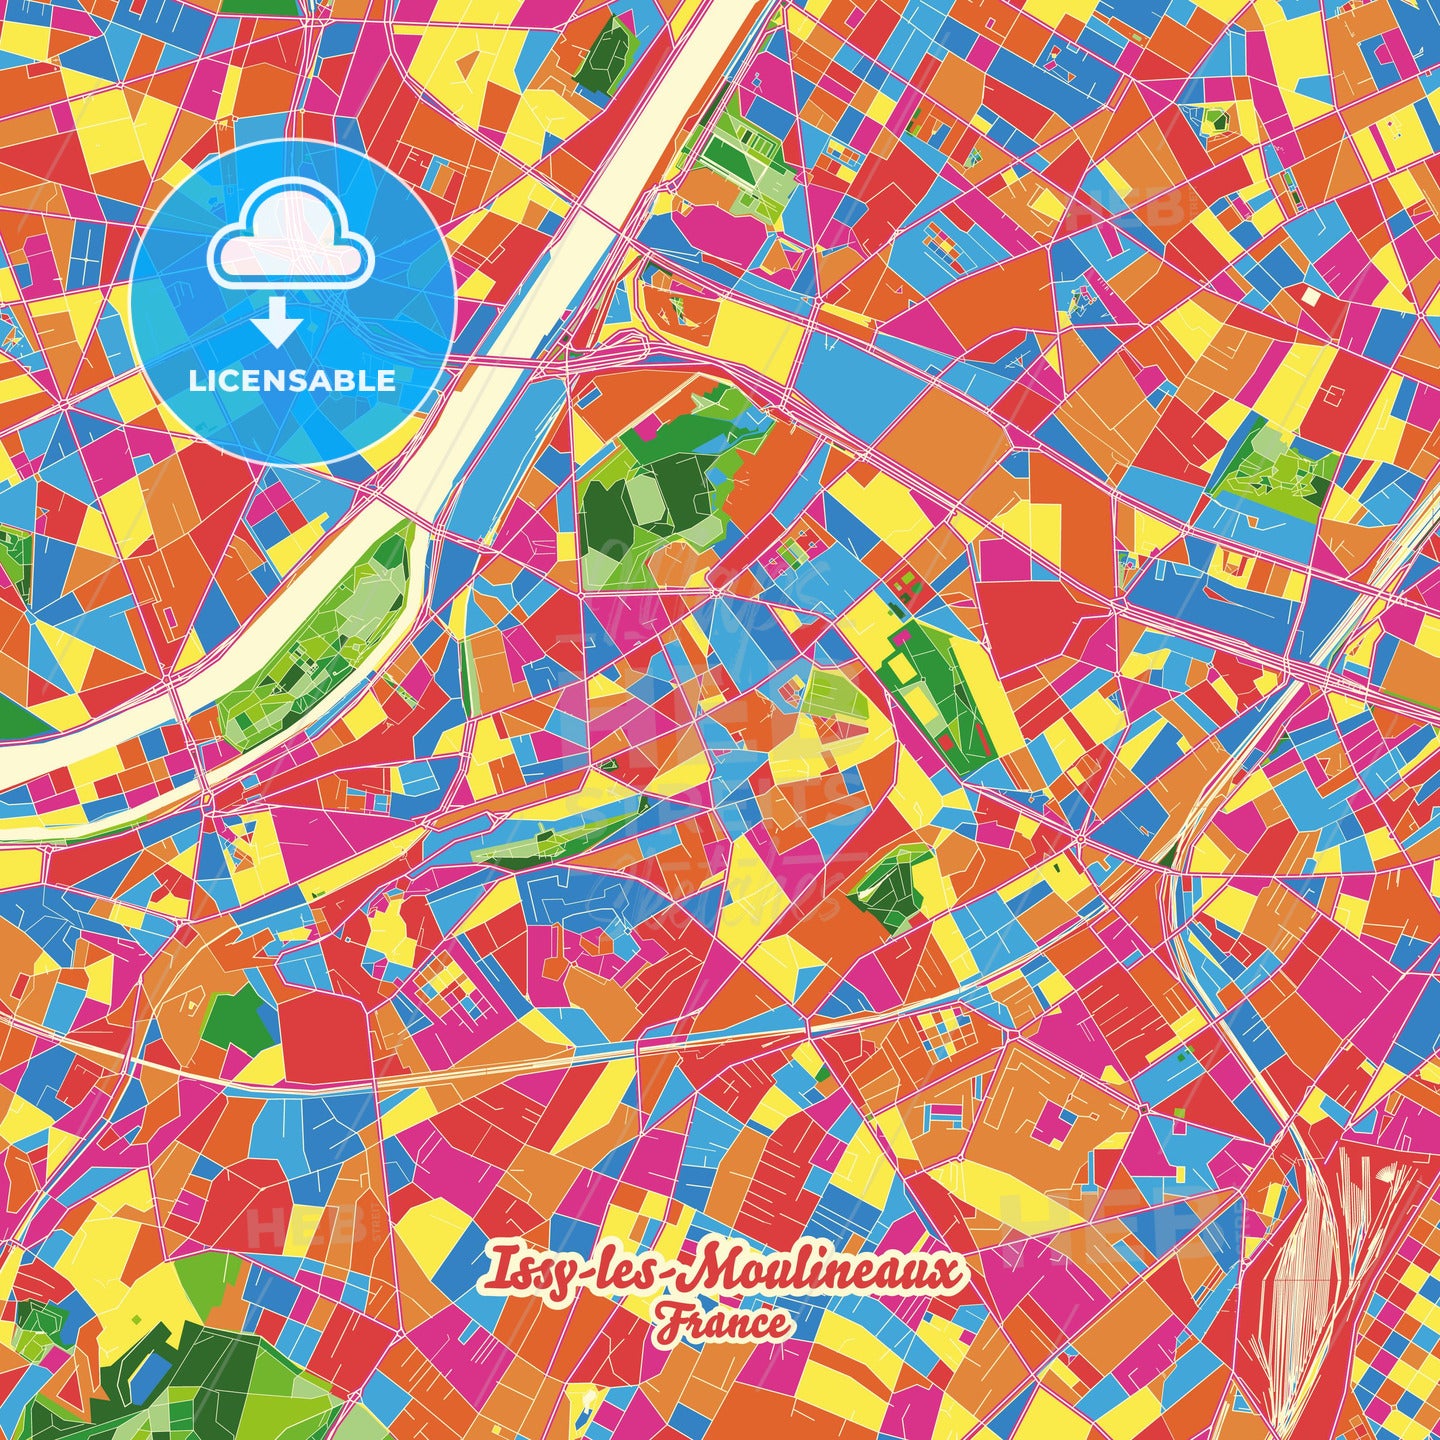 Issy-les-Moulineaux, France Crazy Colorful Street Map Poster Template - HEBSTREITS Sketches